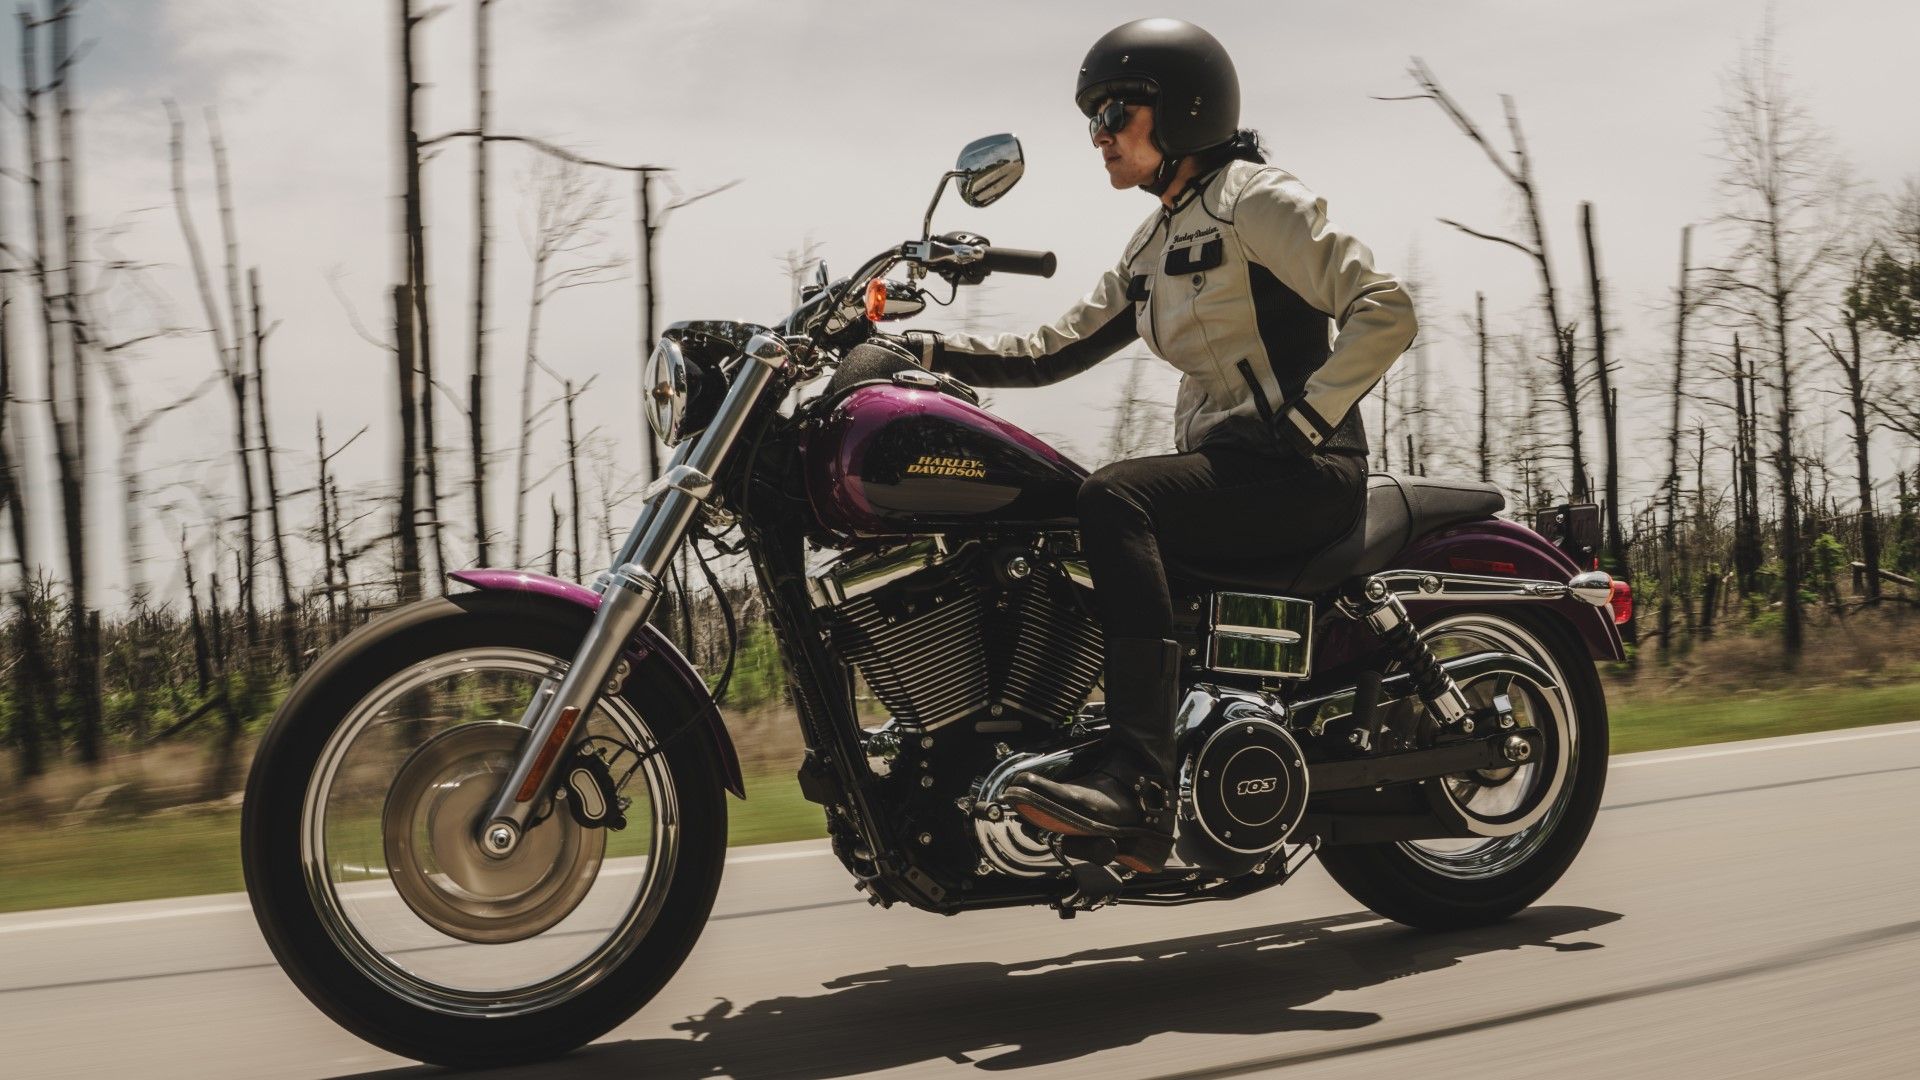 2016 Harley-Davidson Dyna Low Rider on the road